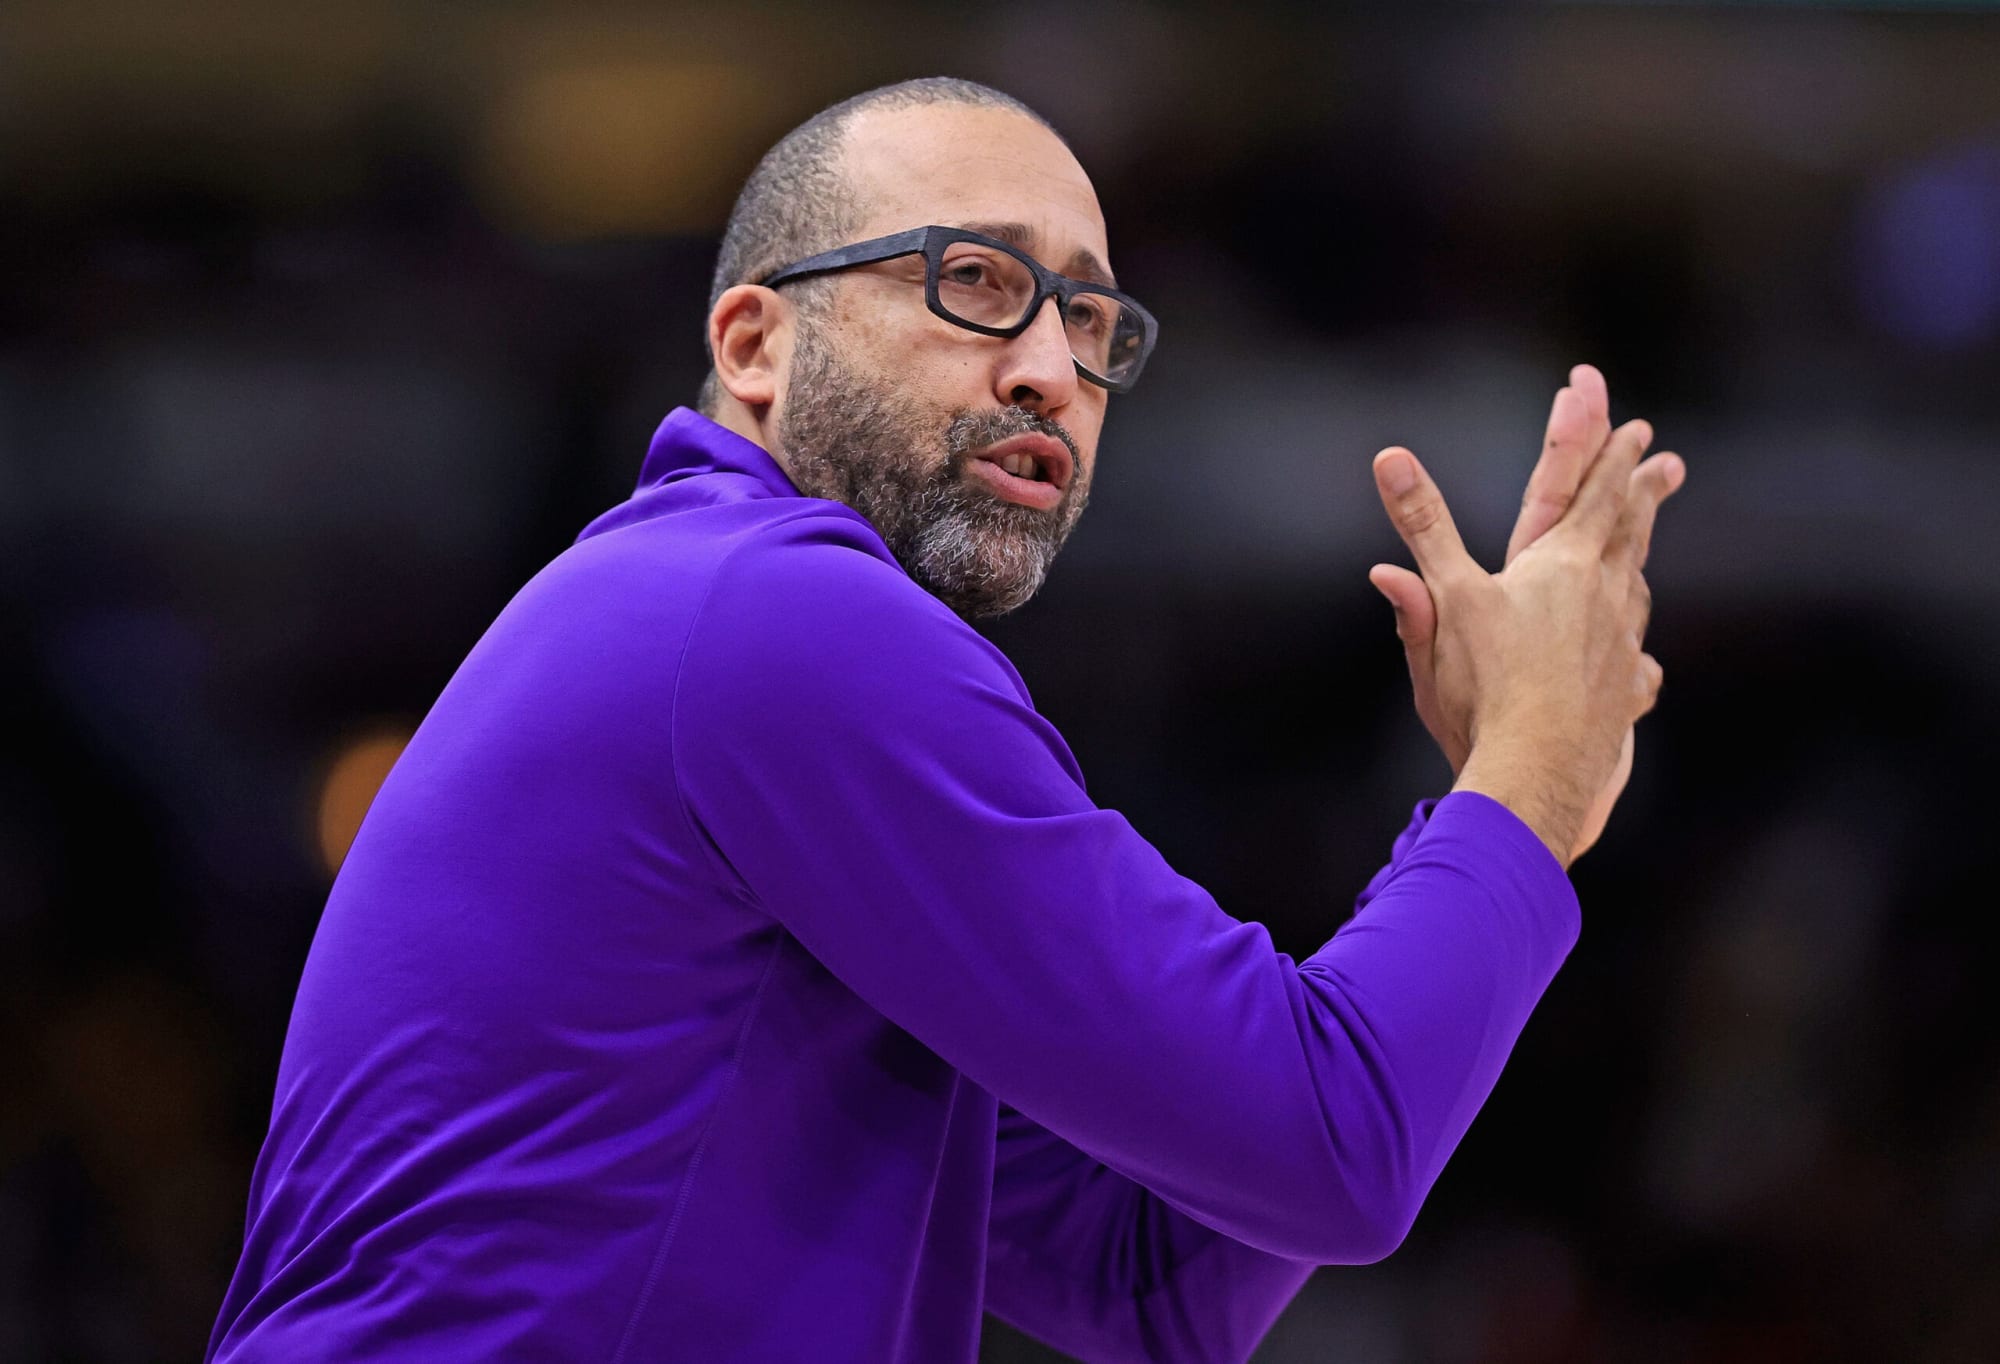 Hiring of David Fizdale shows the intent of Suns’ ownership this summer